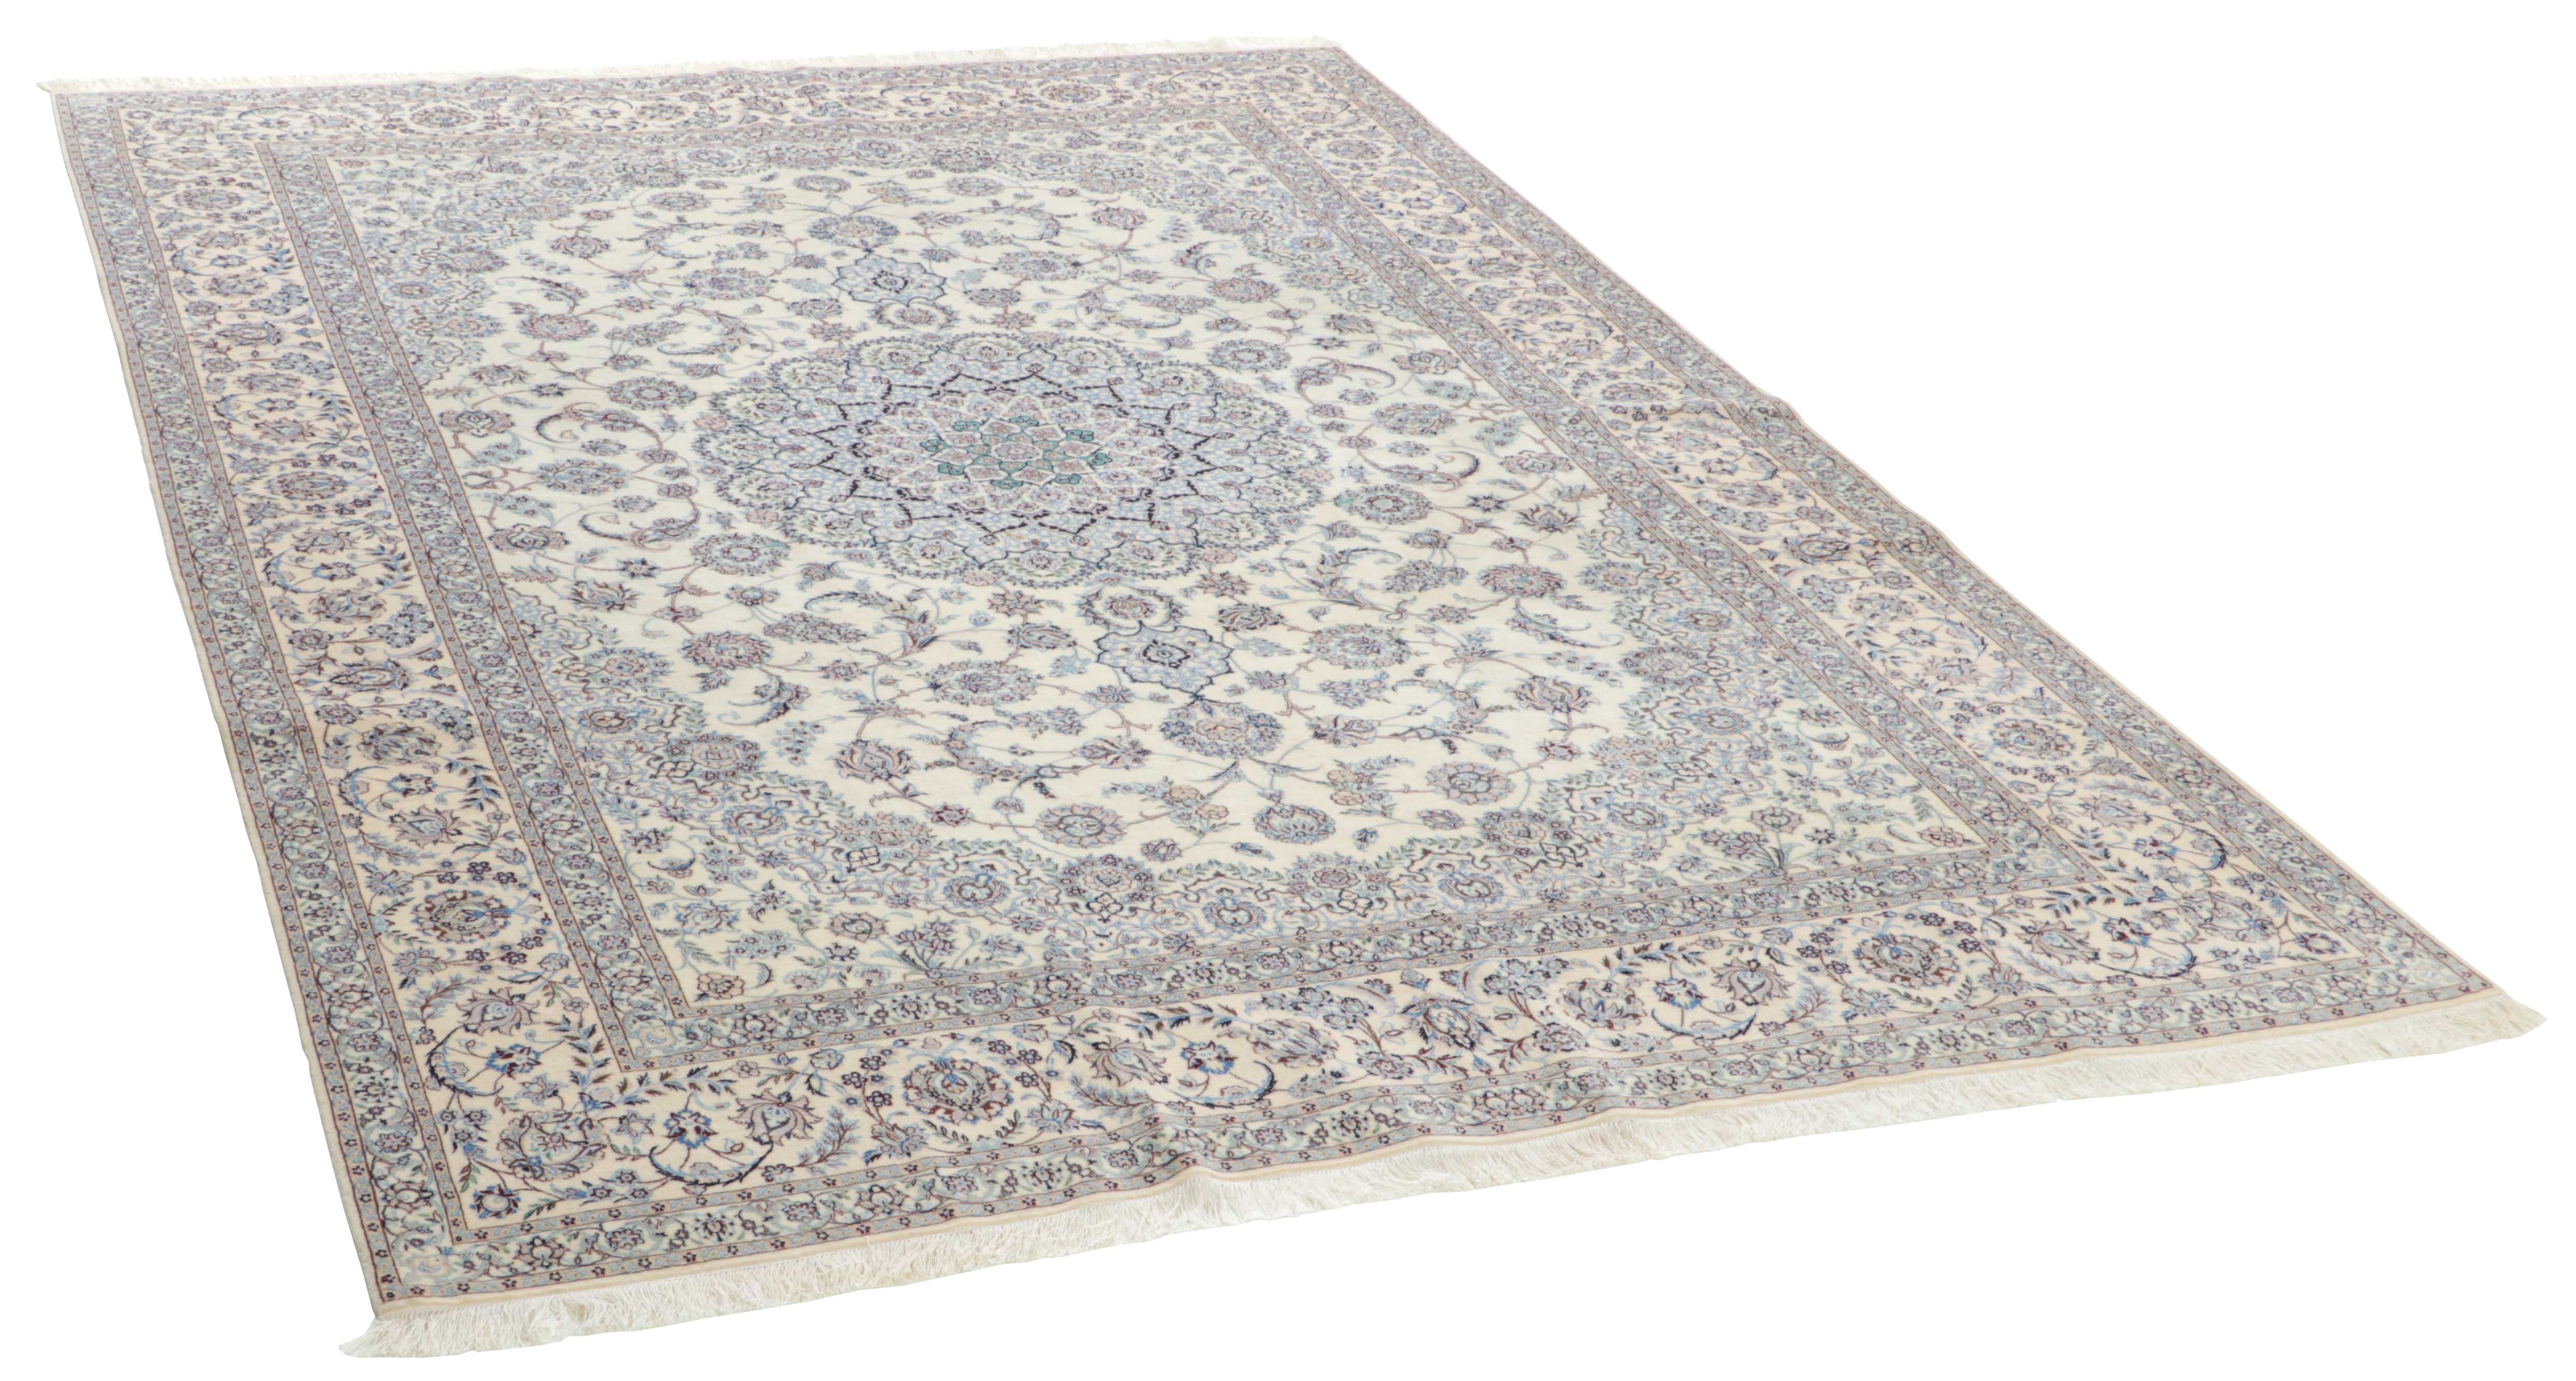 Authentic persian rug with traditional floral design in ivory and black